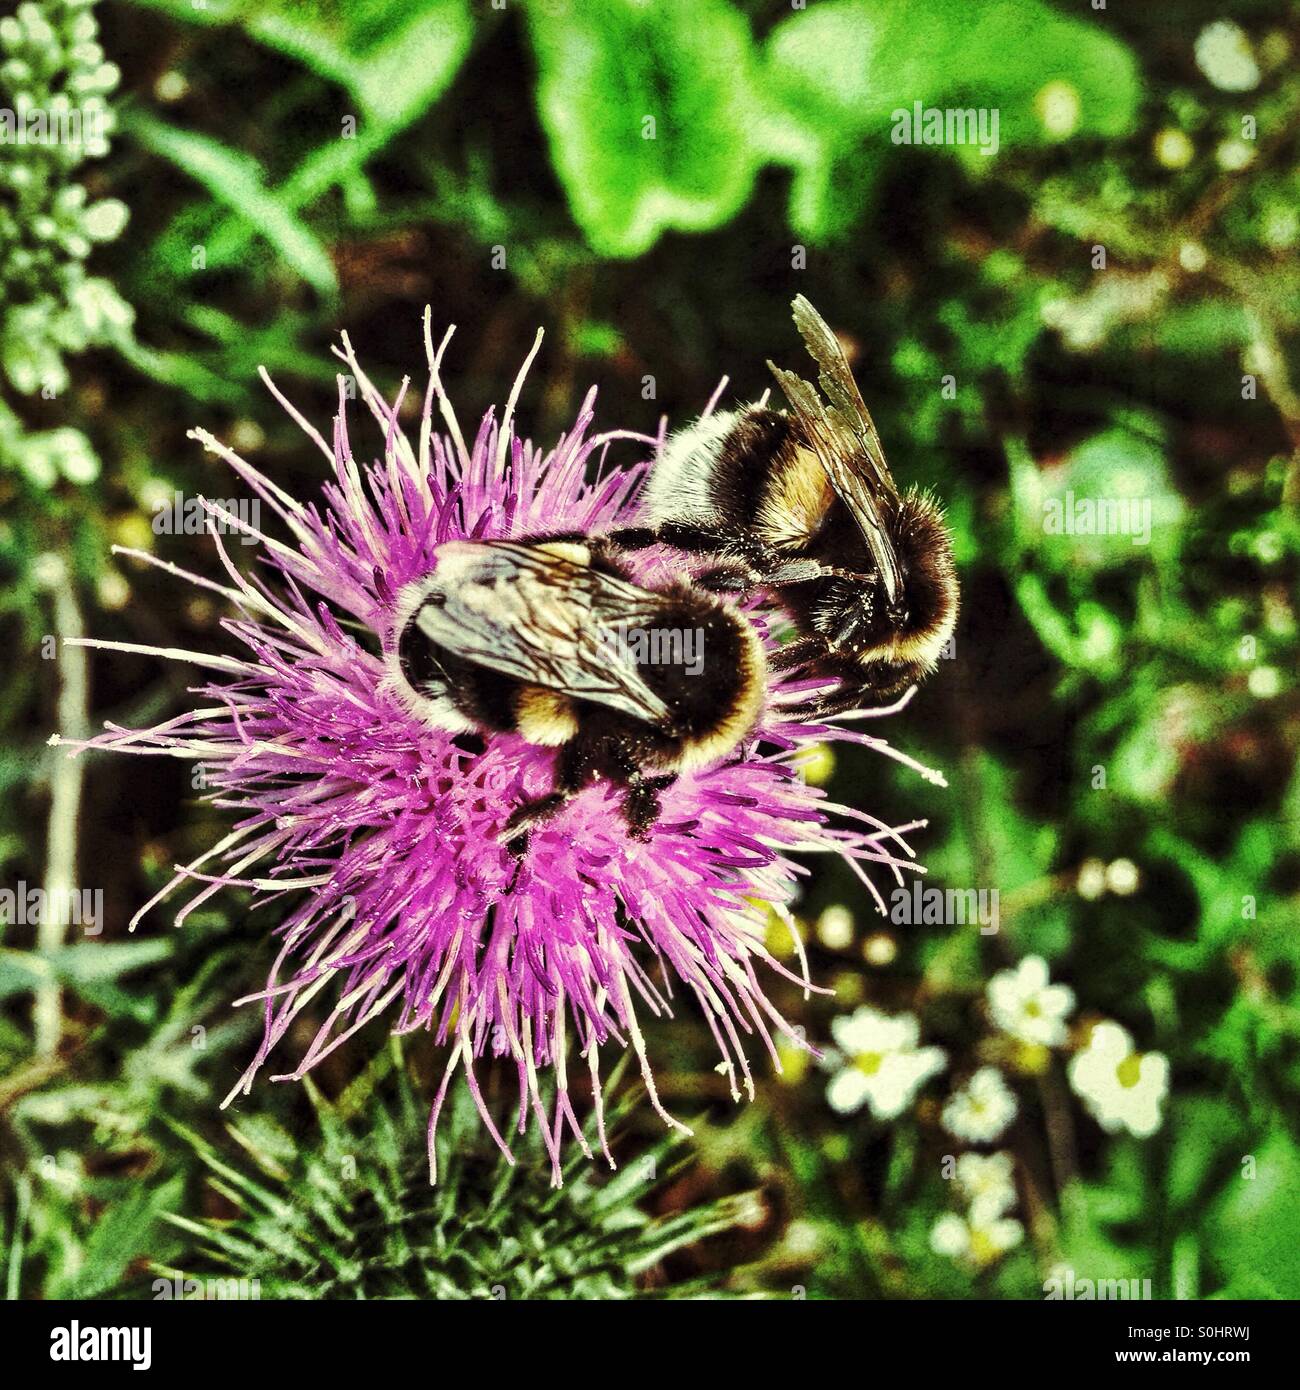 Bumble bees on a thistle flower Stock Photo